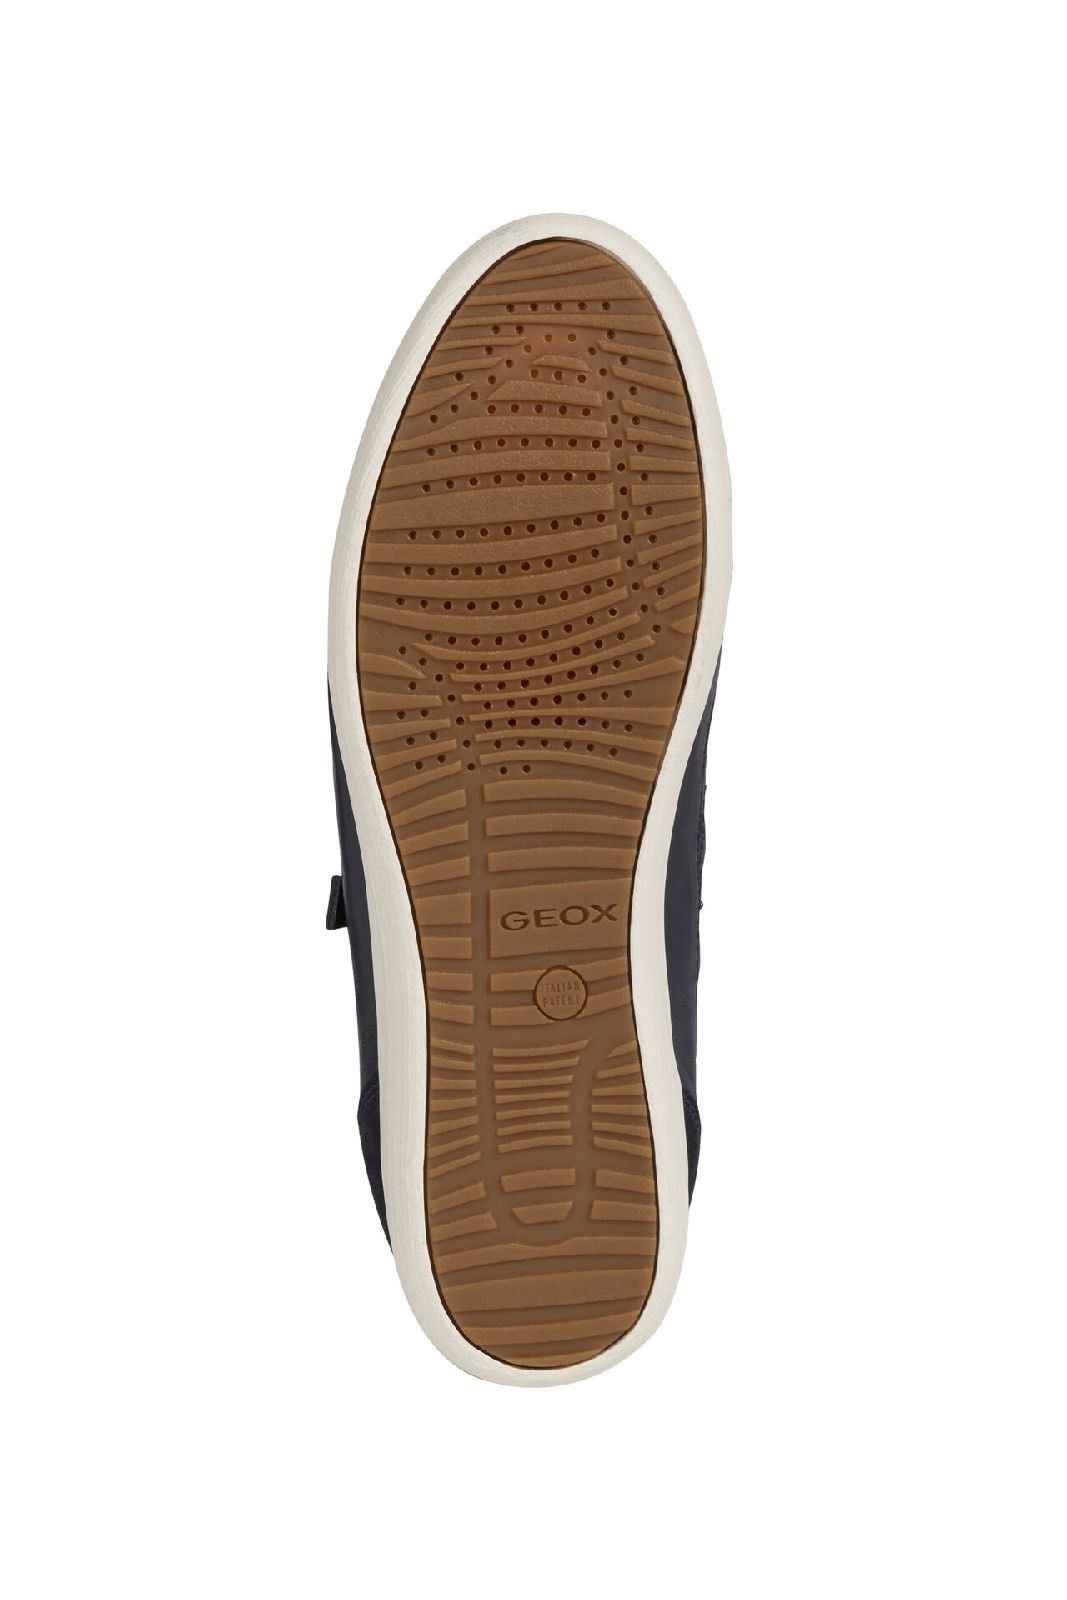 The Geox rubber sole is based on an exclusive patent: the combination of the perforated sole and the breathable and waterproof membrane allow natural temperature regulation, creating the perfect micro-climate that keeps feet dry and comfortable.Exclusive Patent. 
360 Degree breathability. 
Resistant outsole.